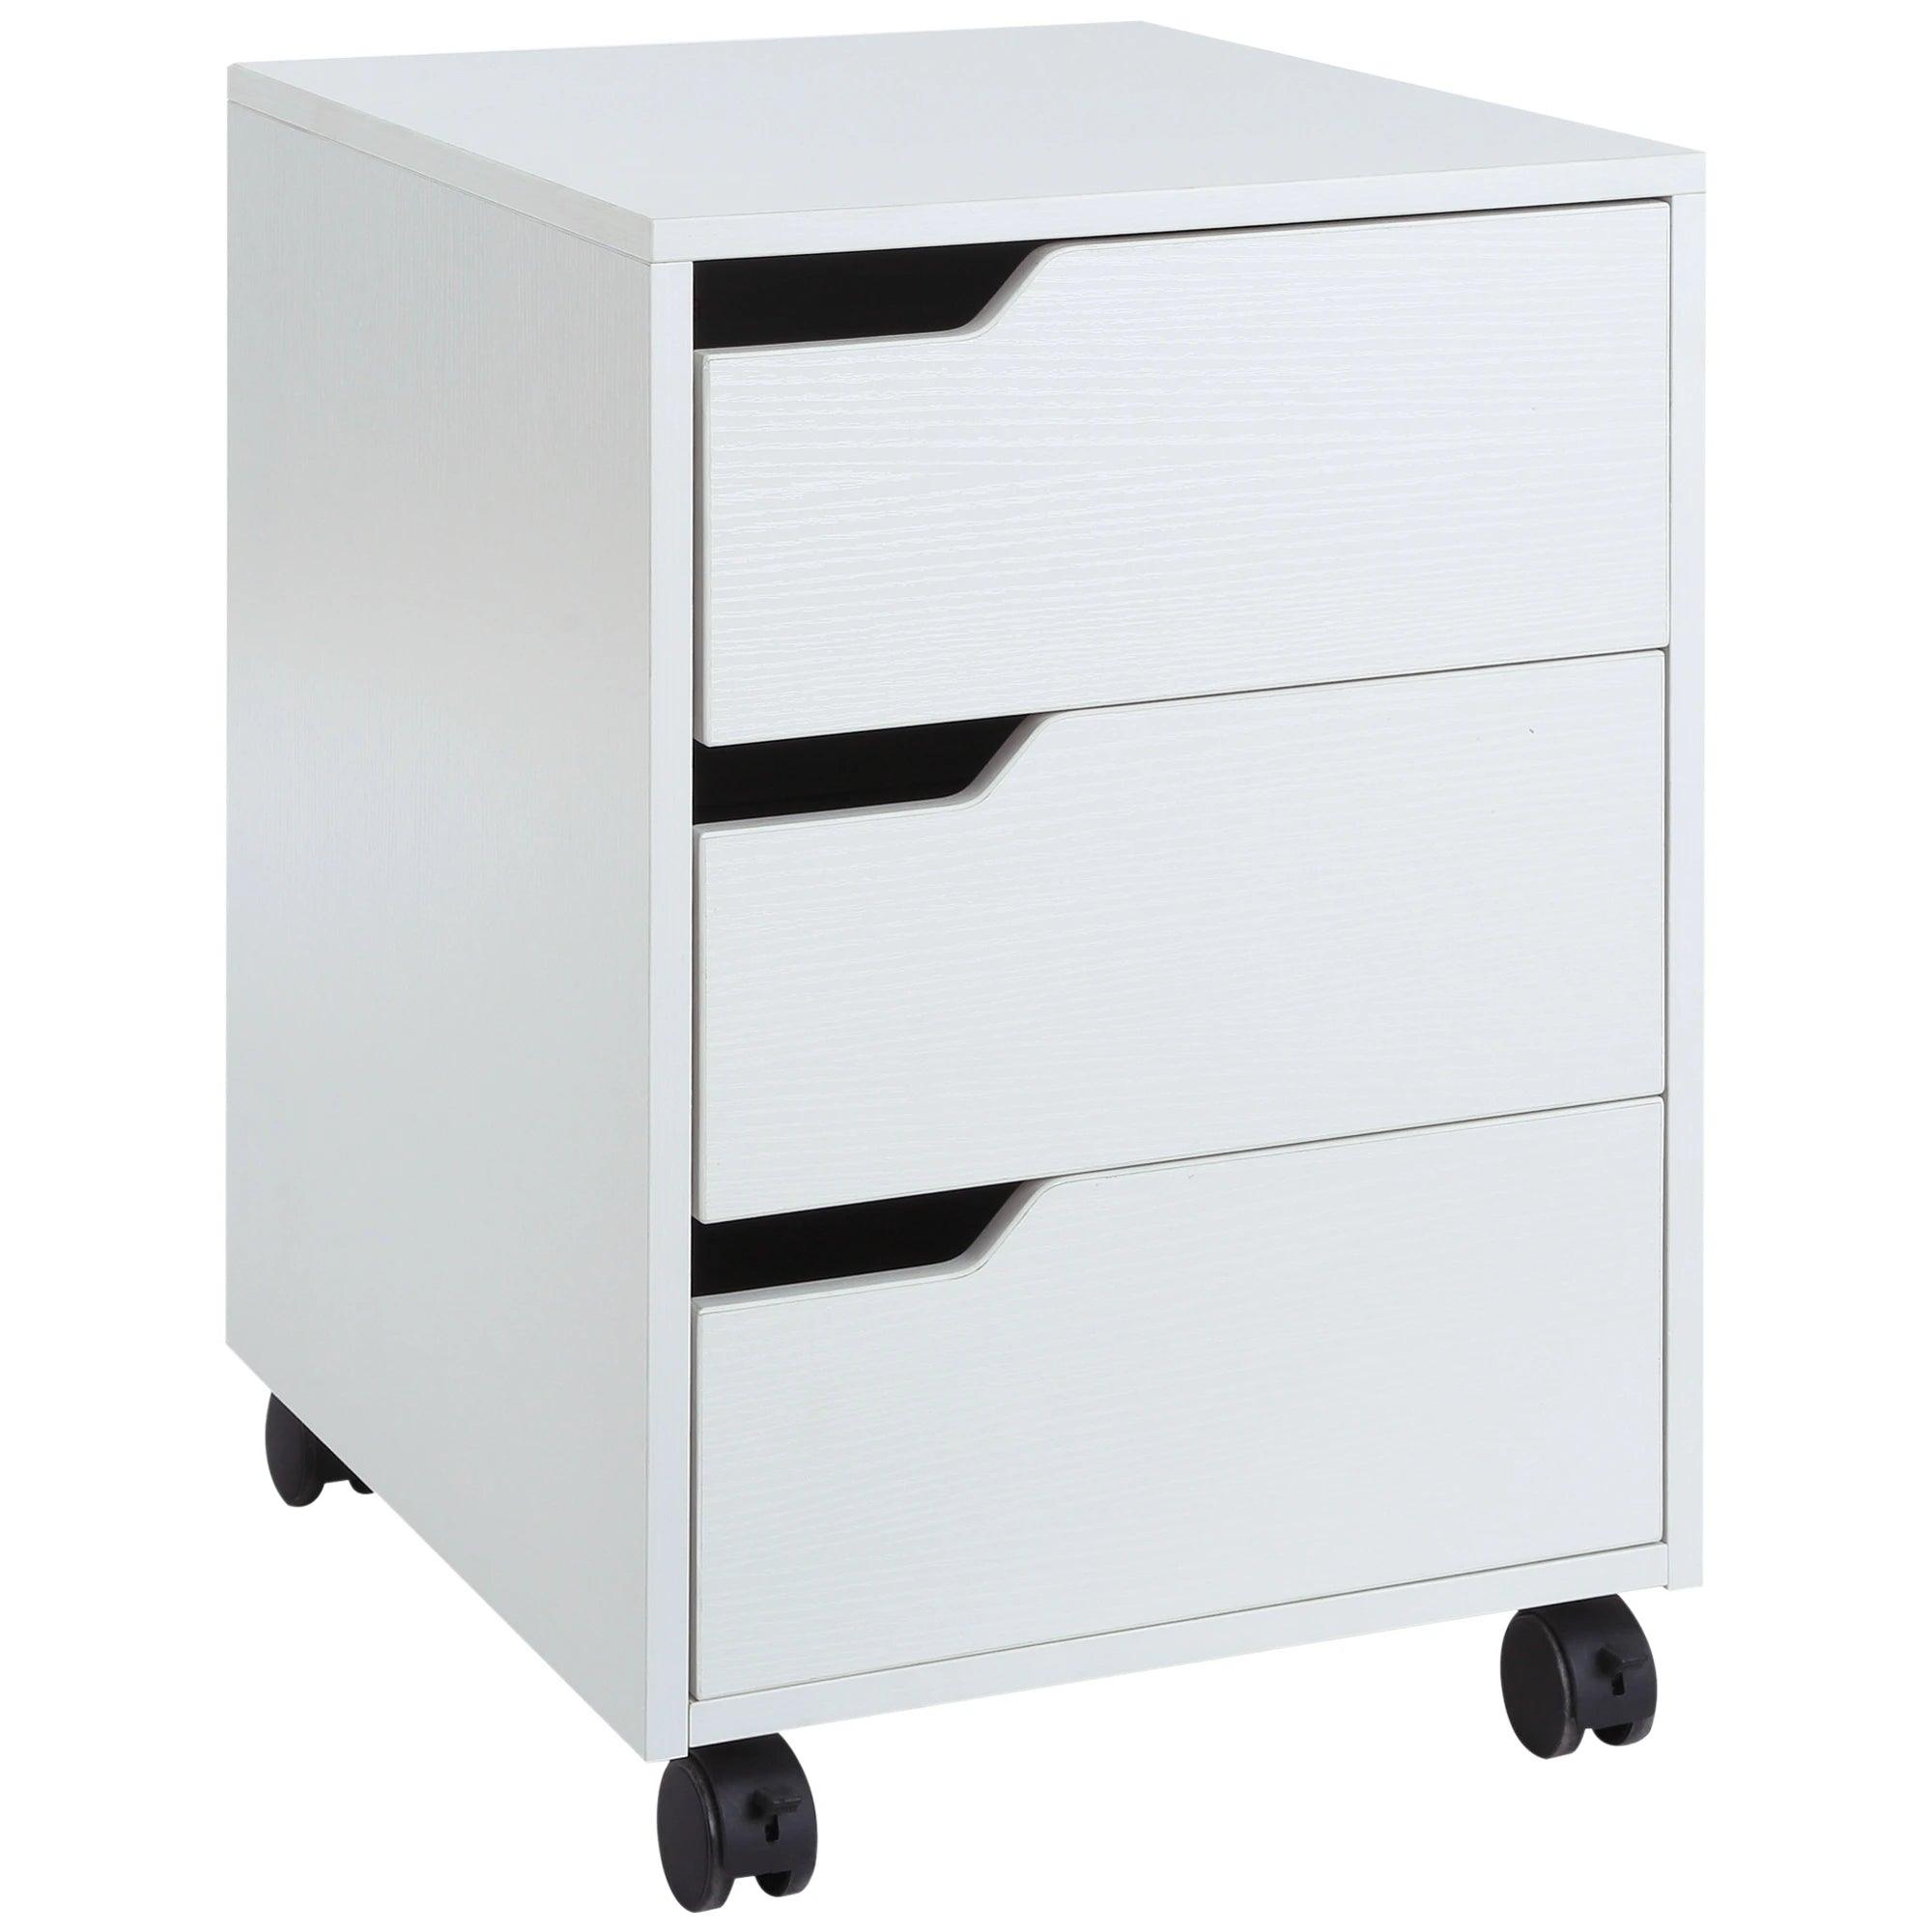 3 Drawer File Cabinet, Mobile Vertical Filing Cabinet with Wheels, Office Storage Organizer, White